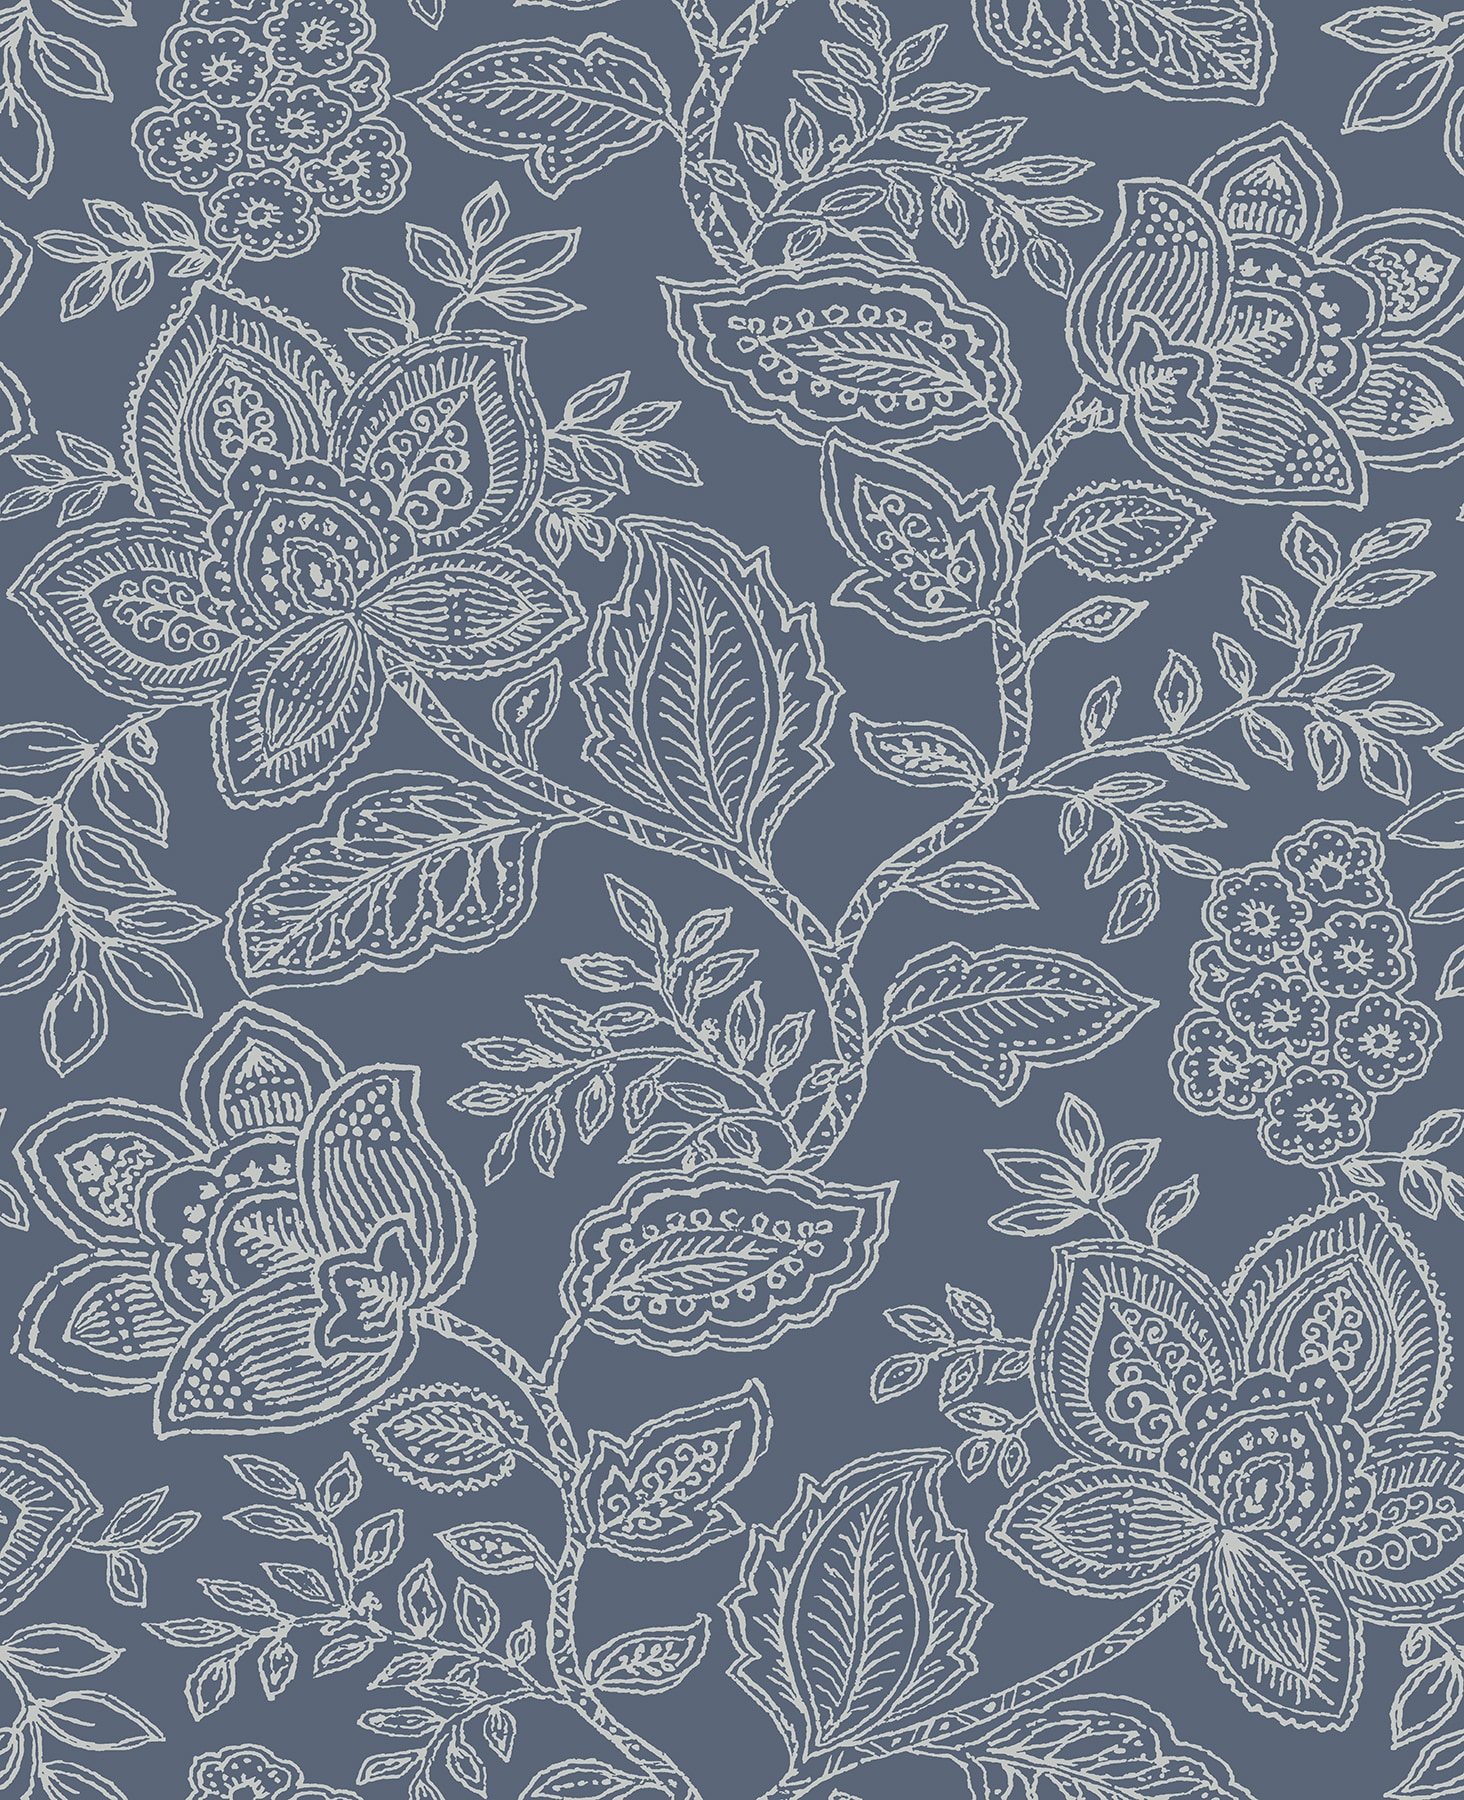 A-Street Prints Equinox 56.4-sq ft Blue Non-woven Floral Unpasted